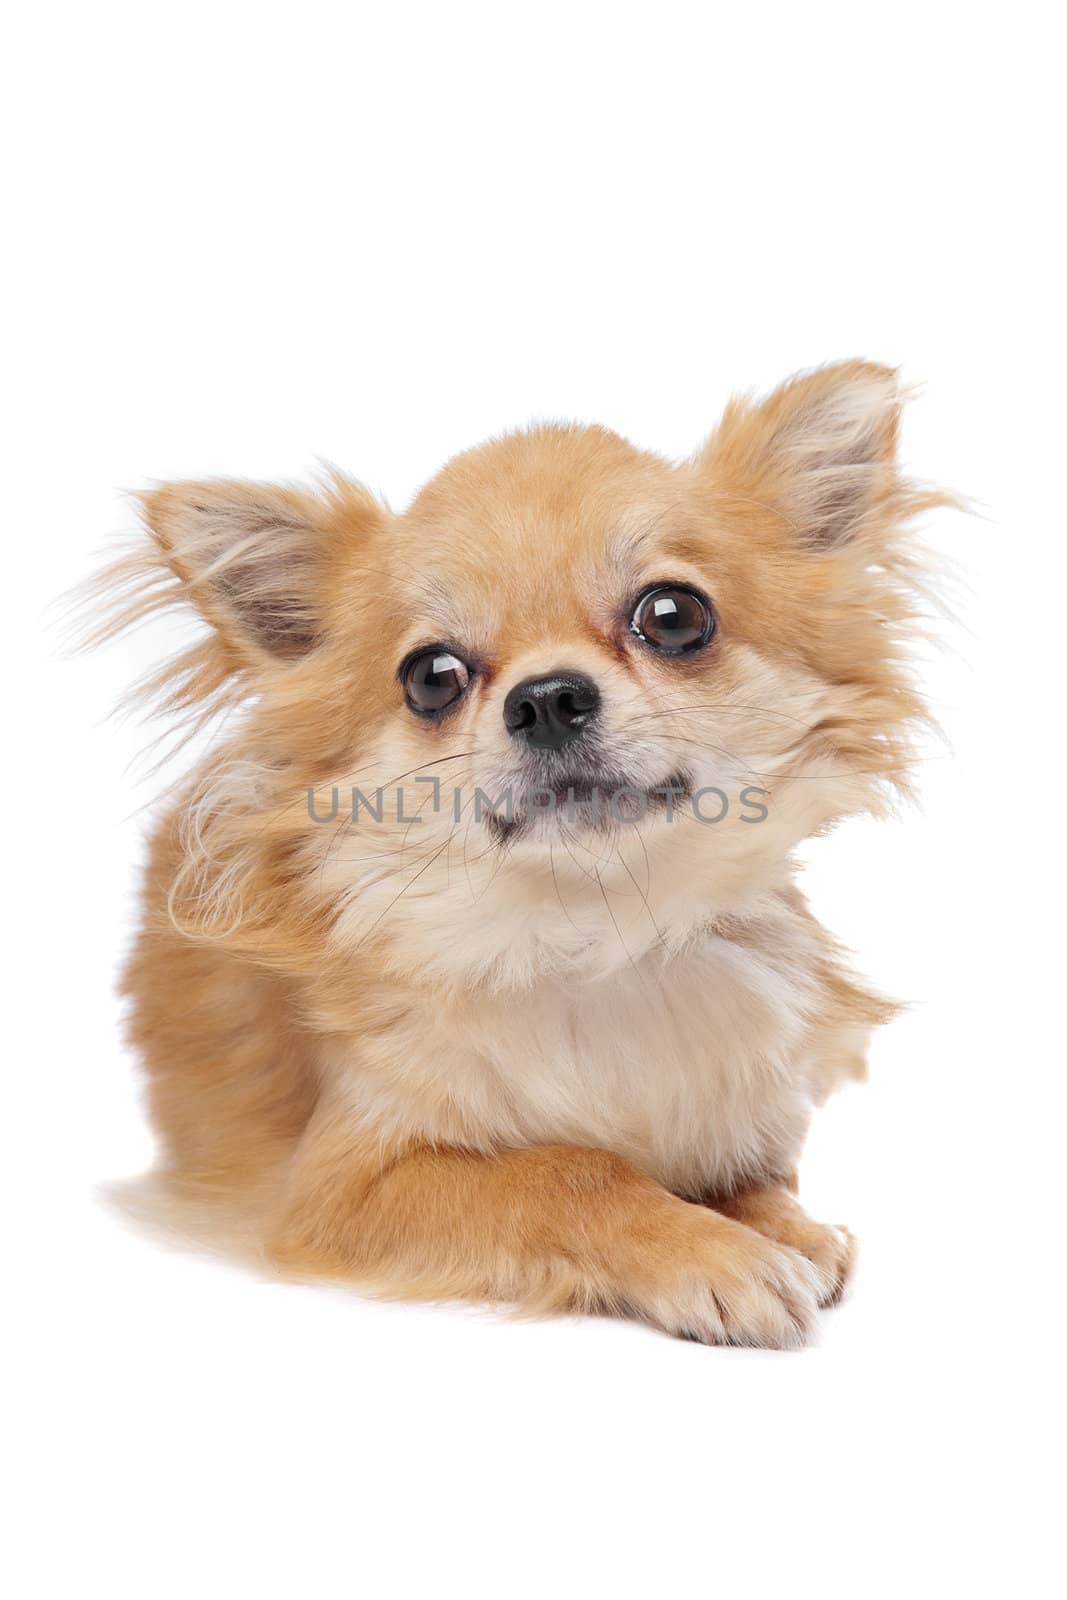 Brown long haired chihuahua in front of a white background